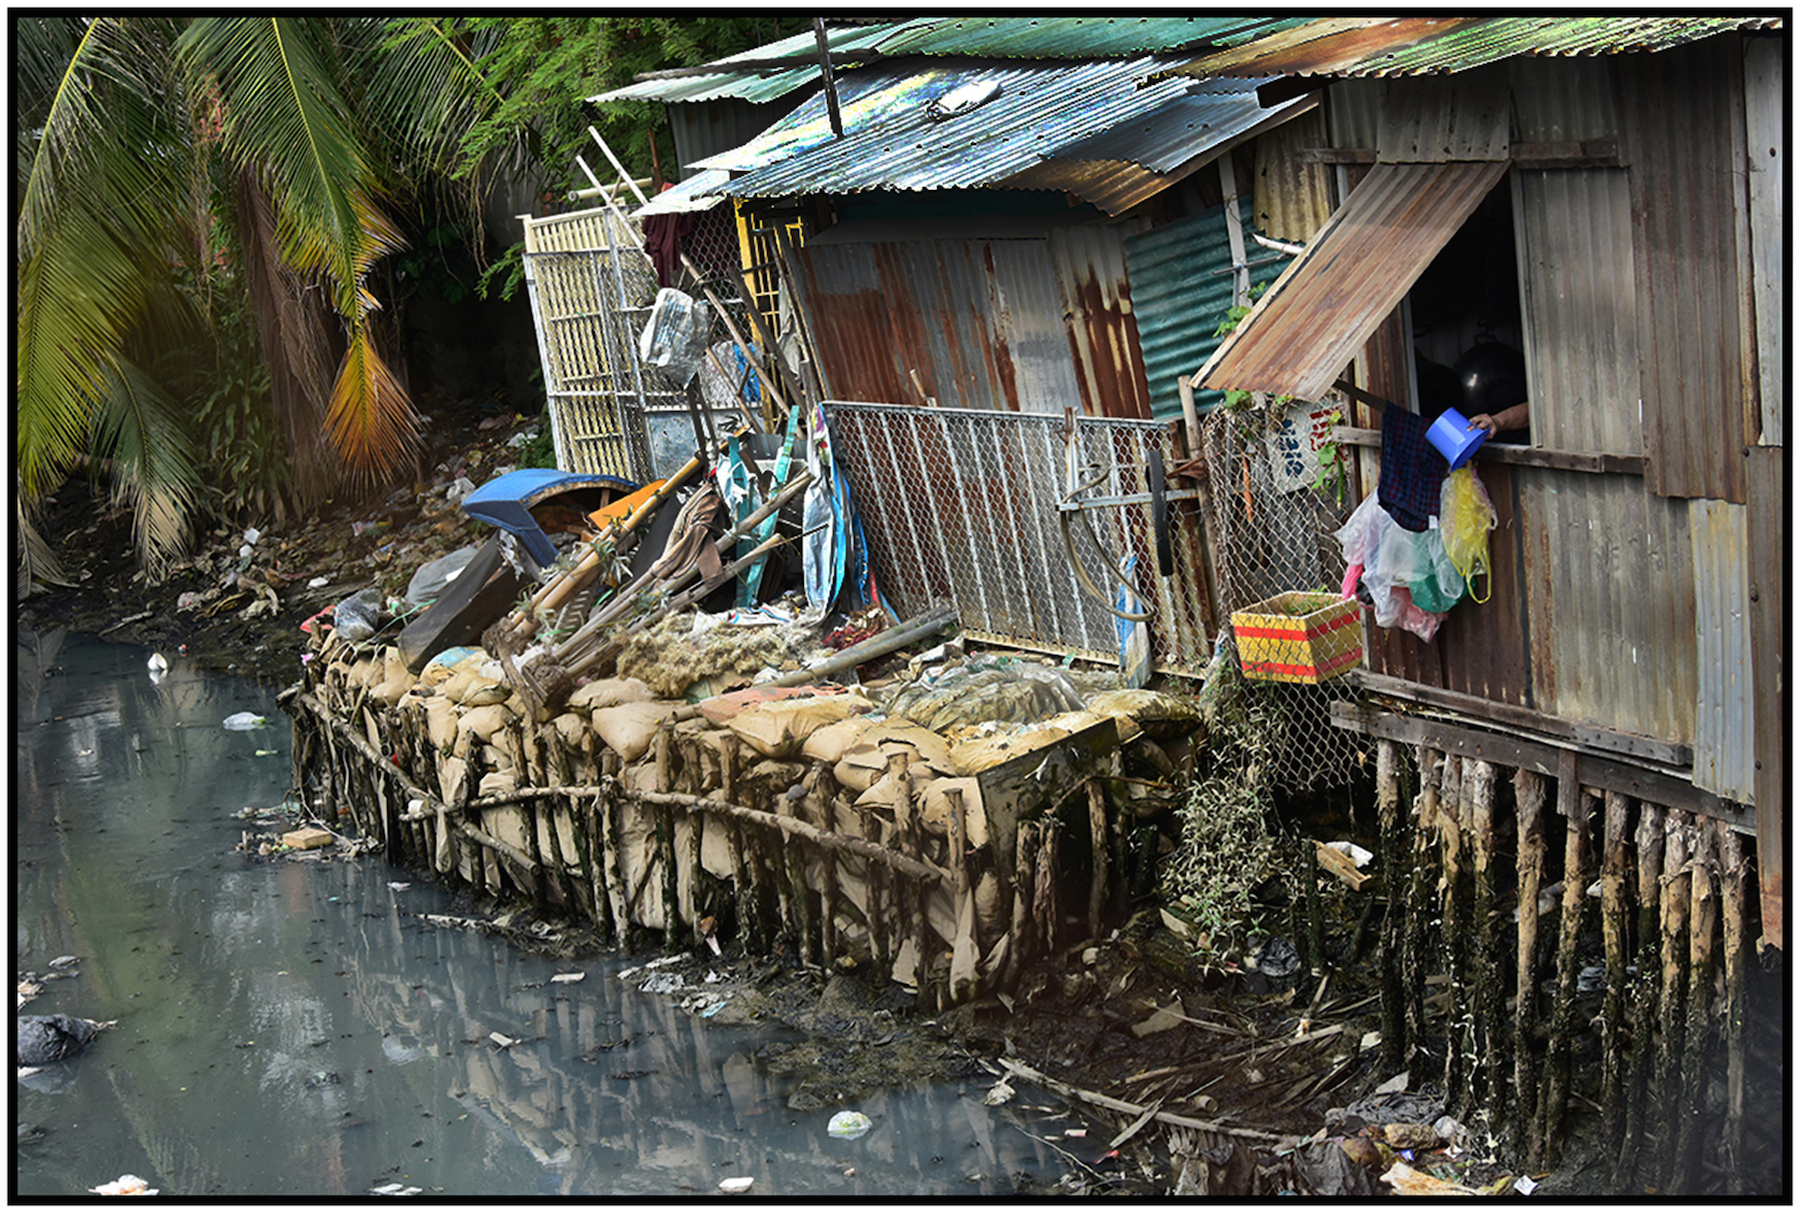  Housing for the poor on polluted canal, Saigo/HCMC, Dec. 2015. #4879 